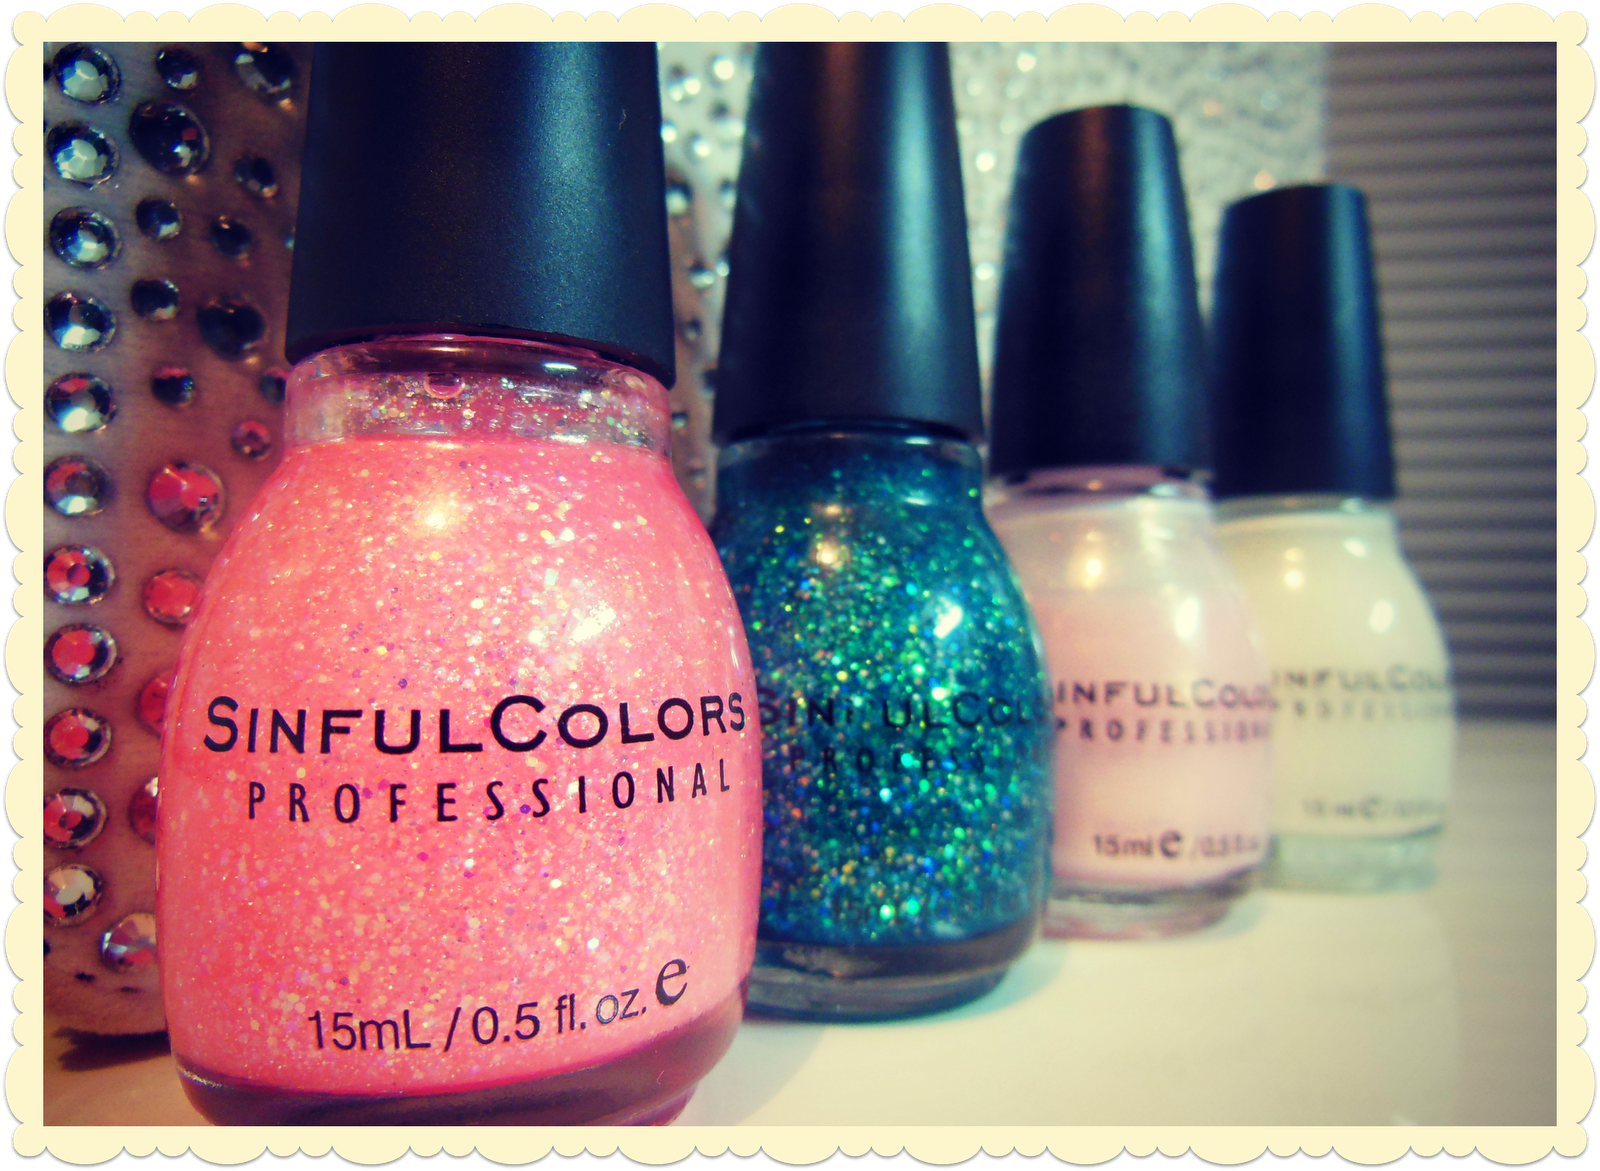 sinful color professional nail polish ingredients